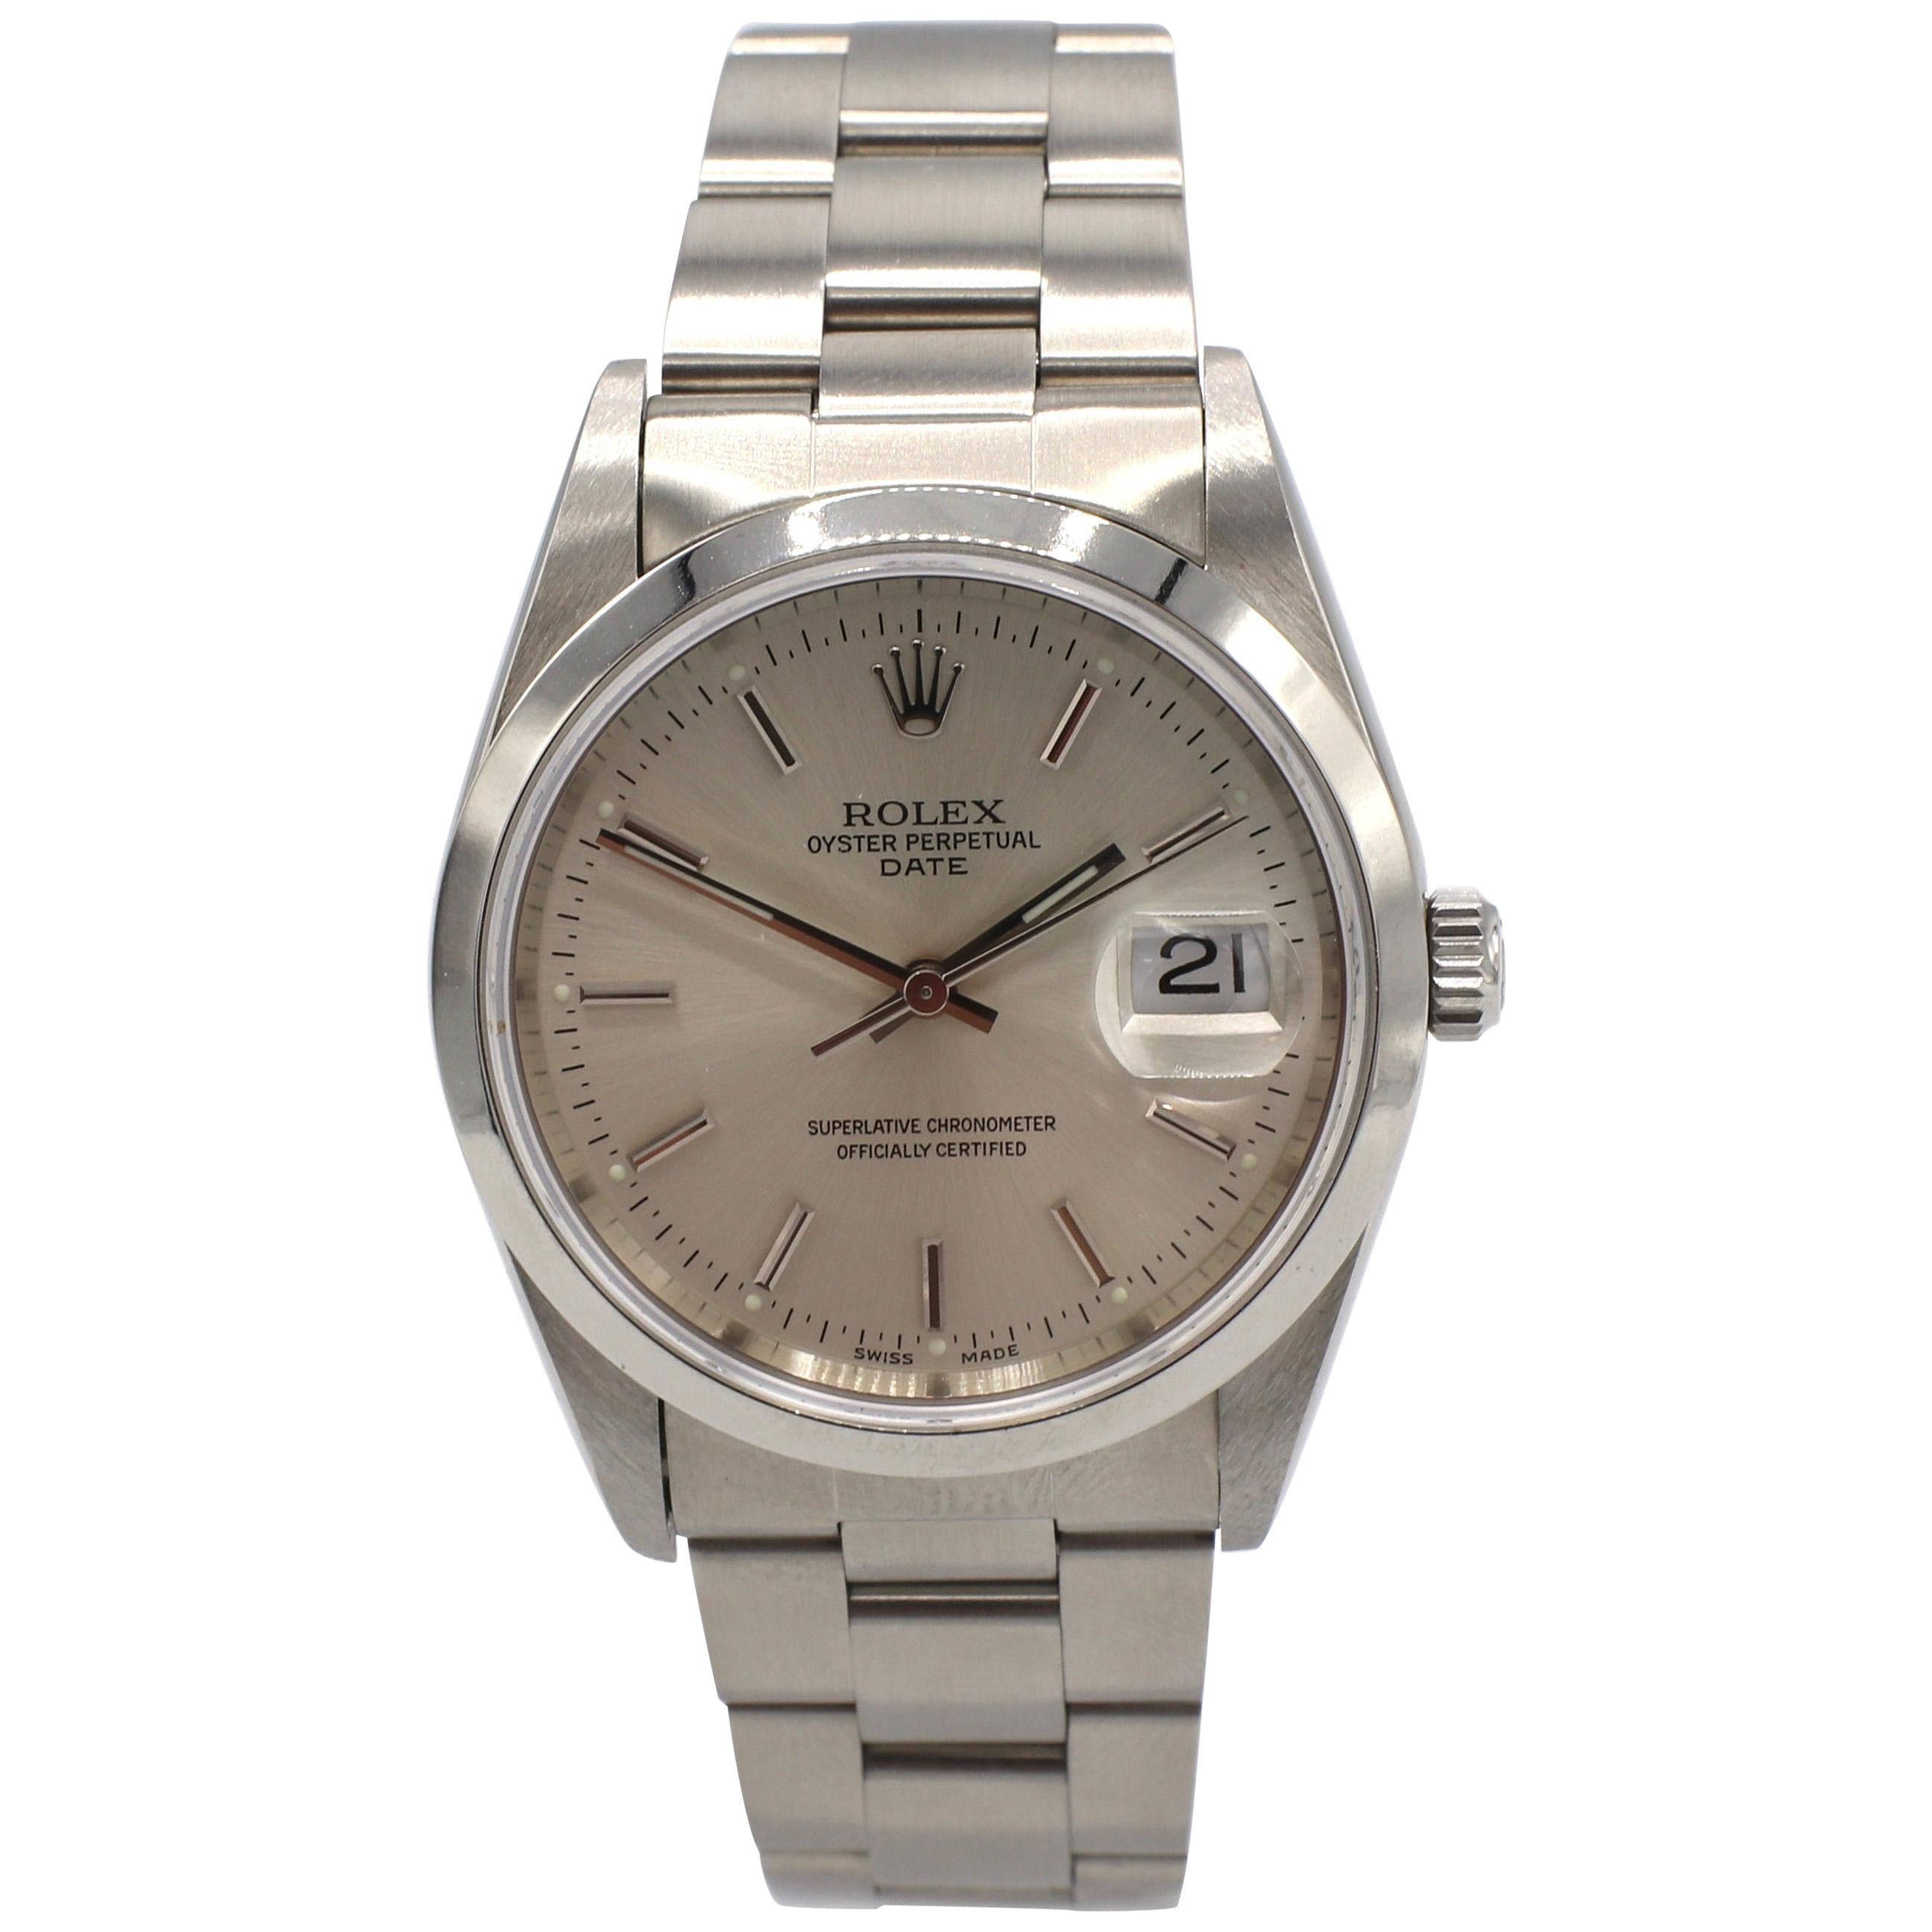 Vintage Rolex Oyster Perpetual Date Steel Watch Model 15200 Box & Papers